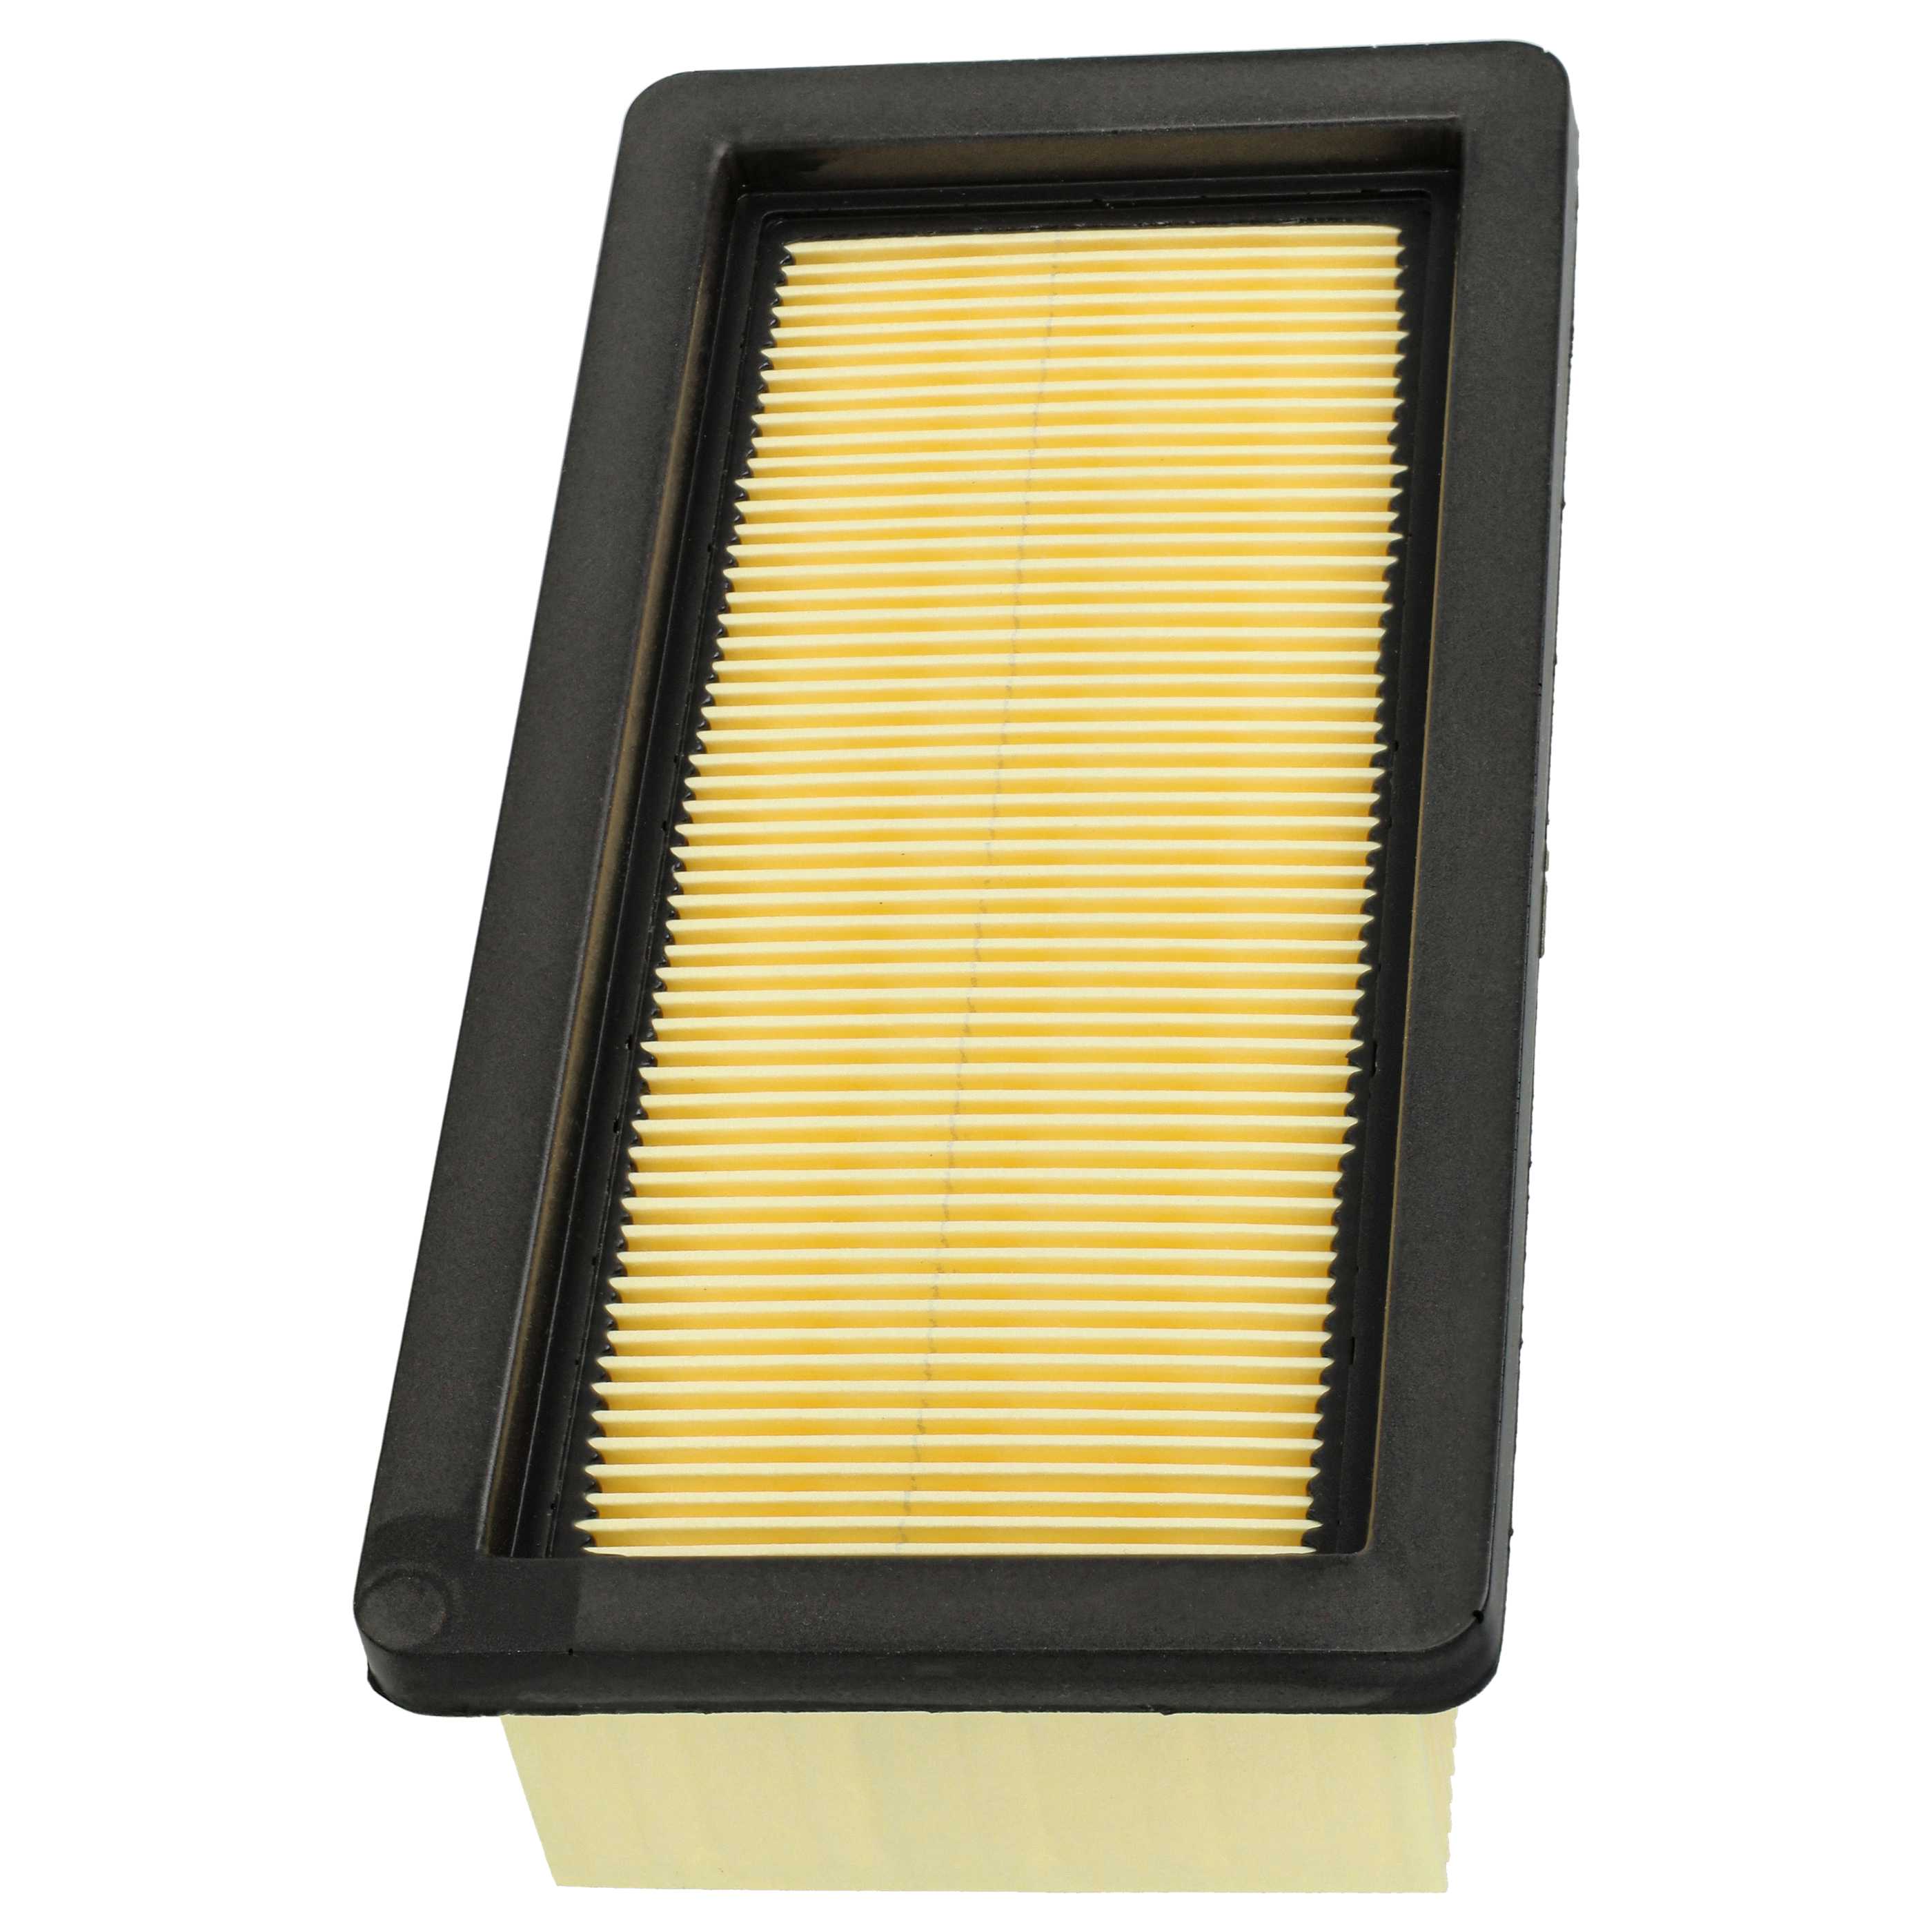 1x flat pleated filter replaces Kärcher 6.414-971.0 for Kärcher Vacuum Cleaner